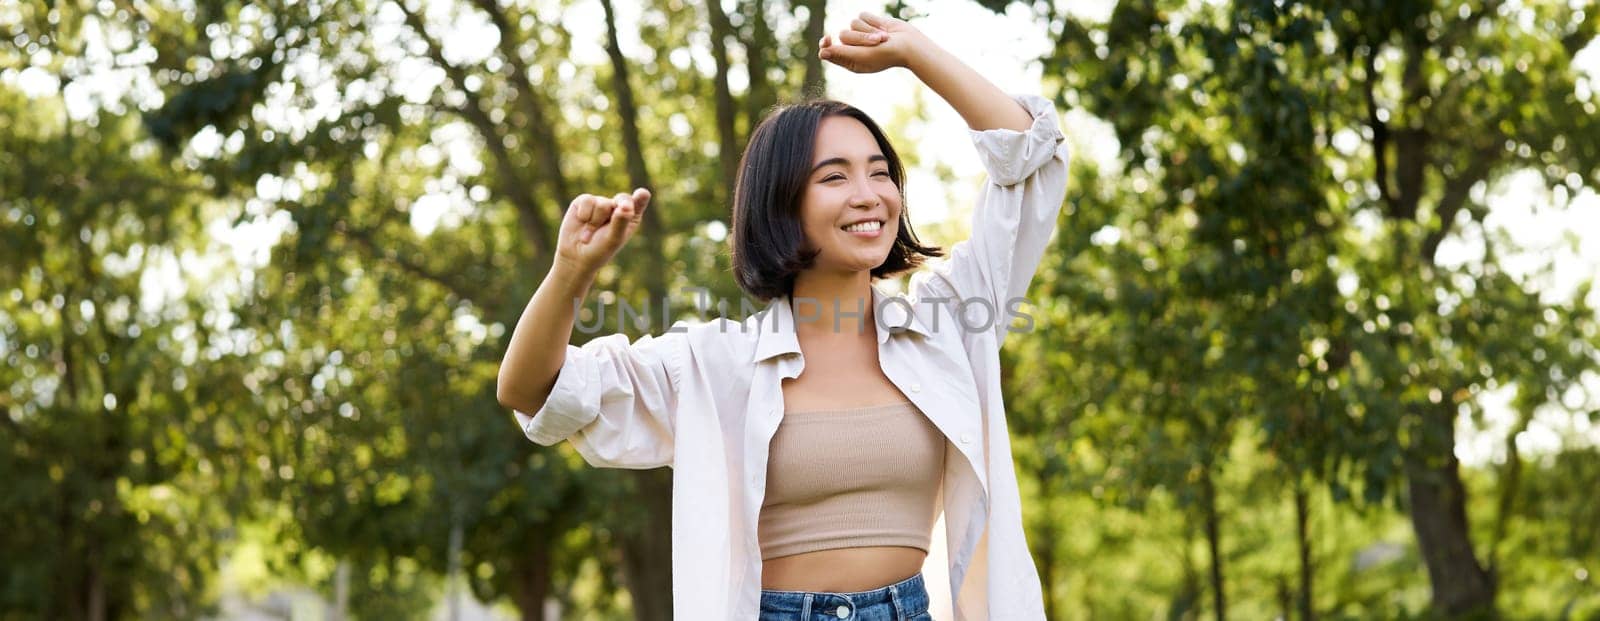 Carefree woman dancing and walking in park with hands lifted up high, smiling happily. Lifestyle concept.